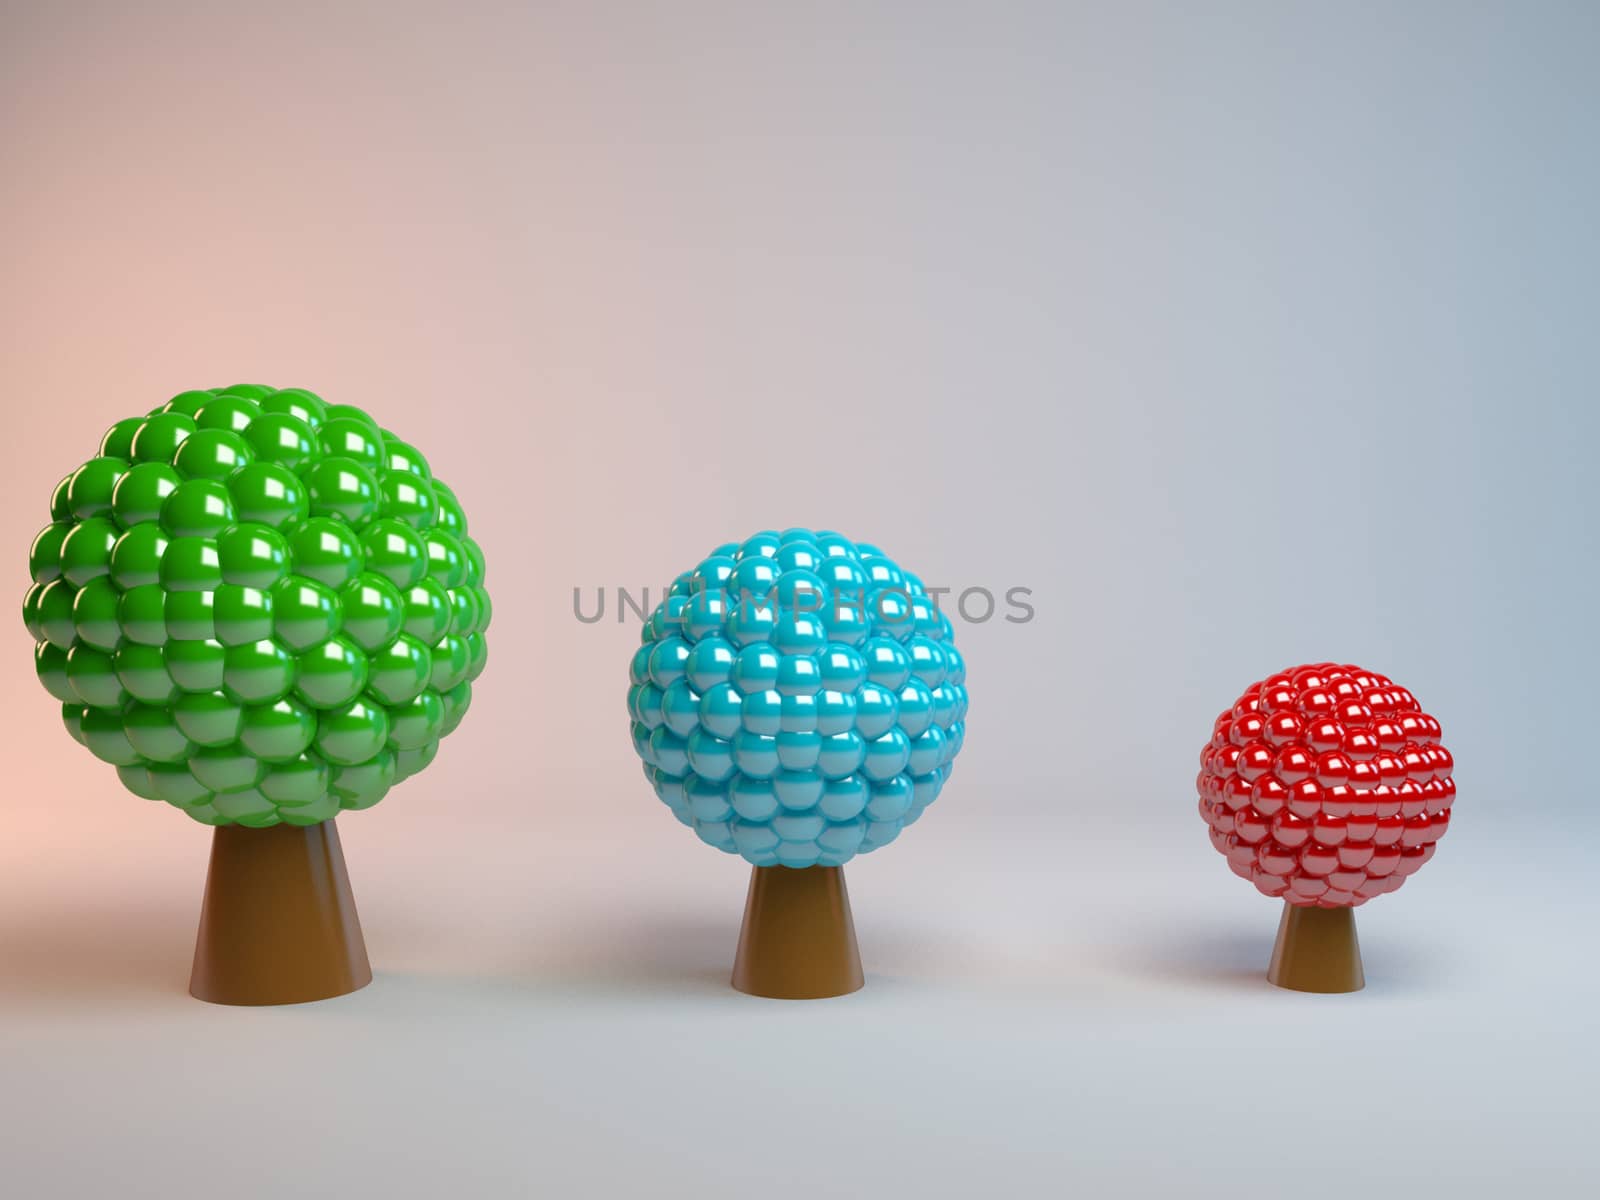 Abstract trees. Concept for business, social media, technology, network and web design. 3d illustration.